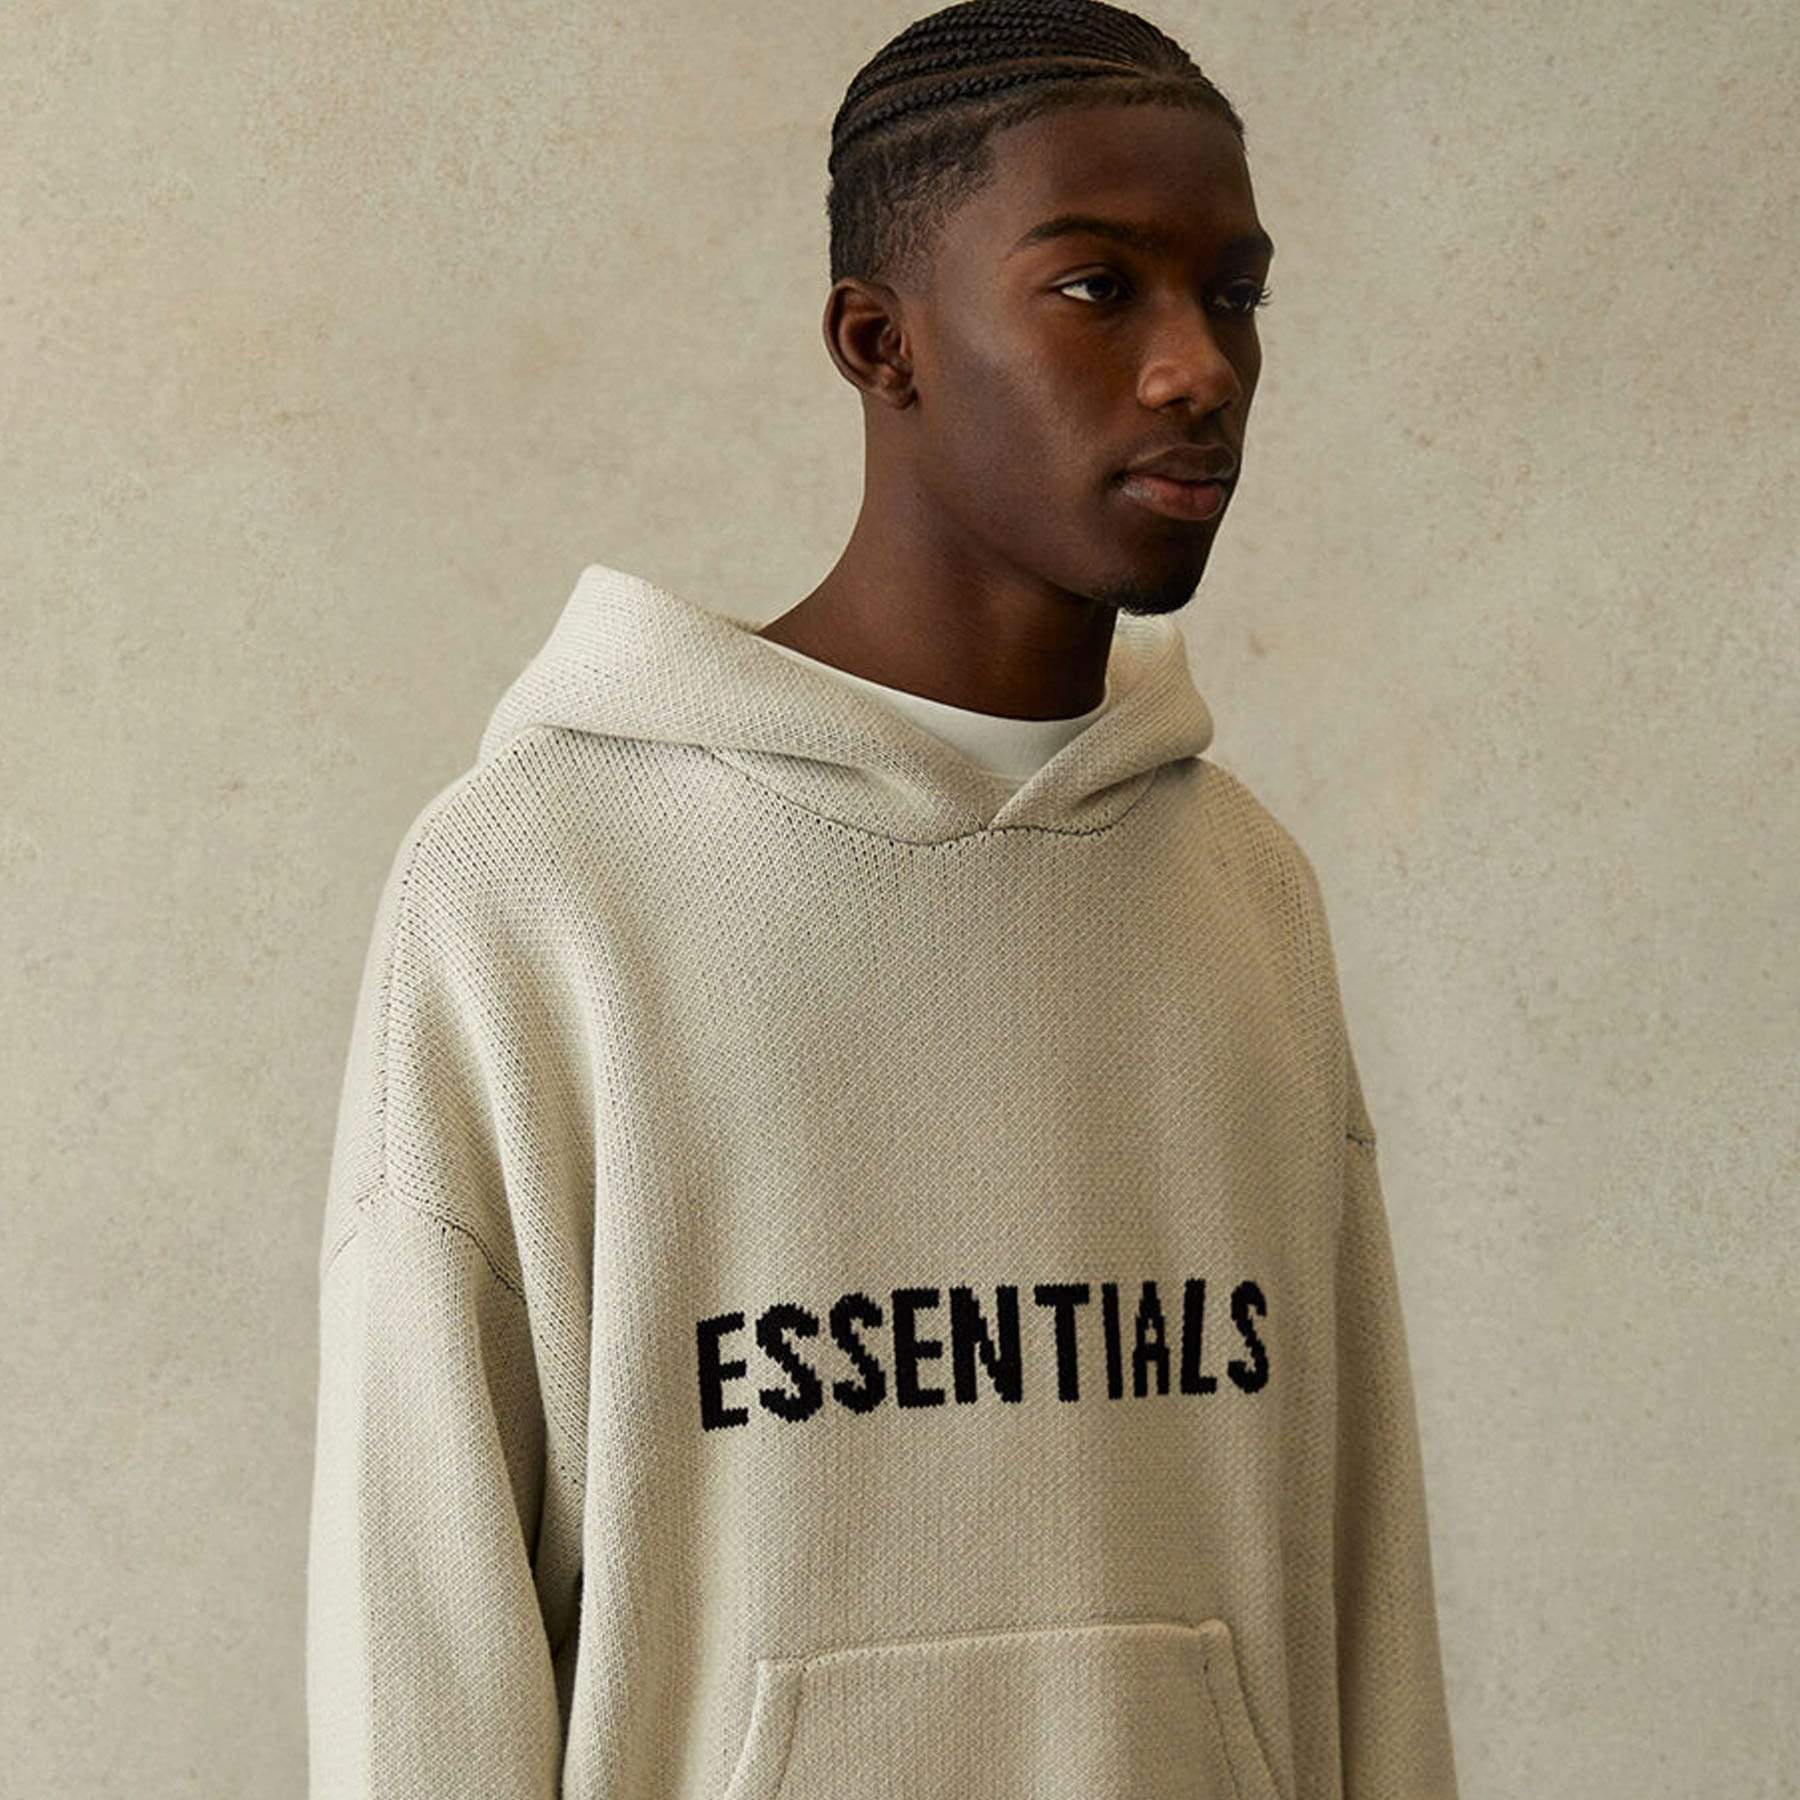 FEAR OF GOD ESSENTIALS Knit Pullover Hoodie Light Heather Oatmeal ...